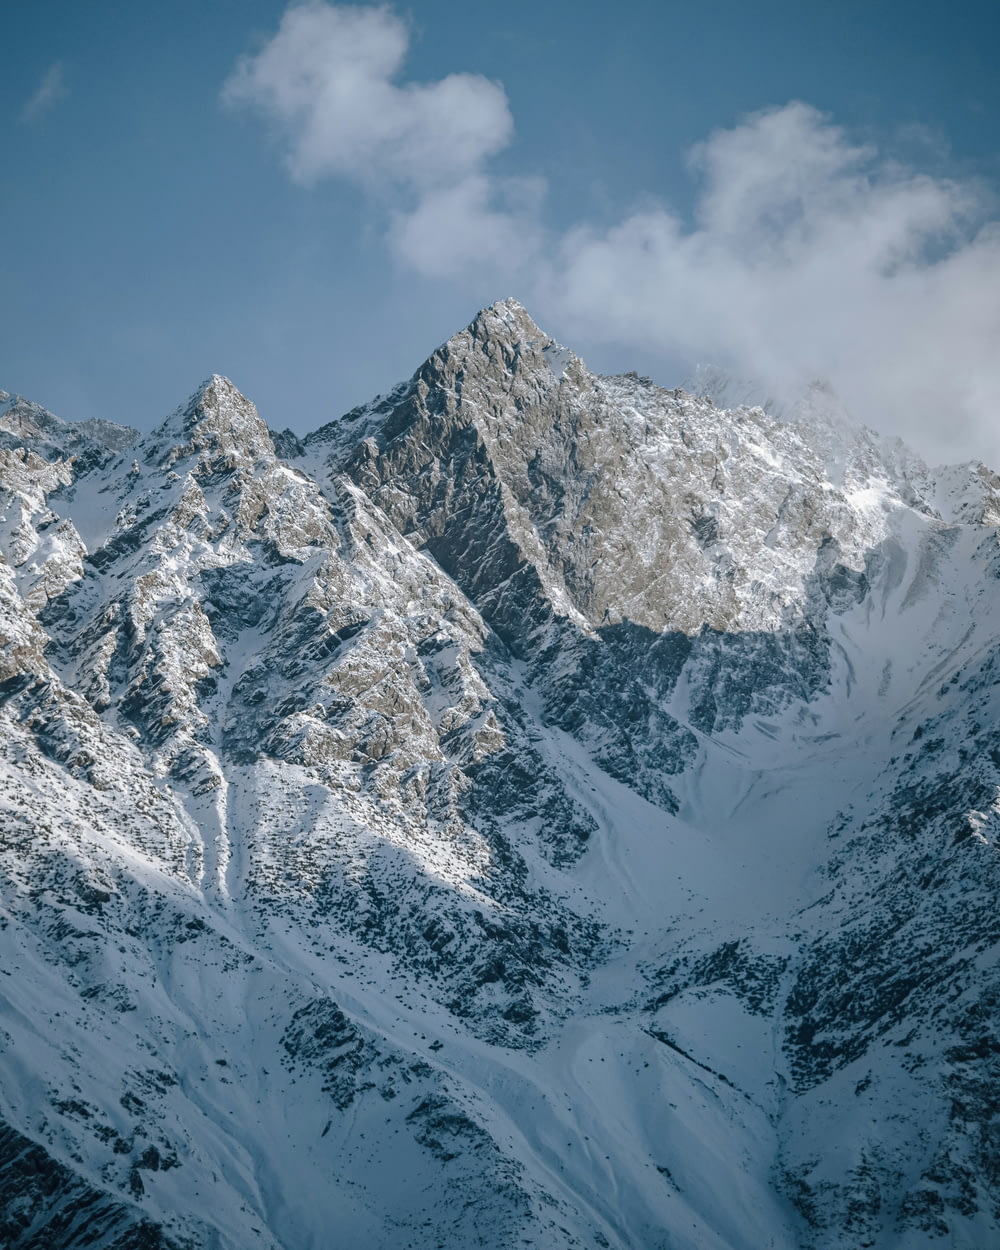 a snow covered mountain range under a cloudy blue sky